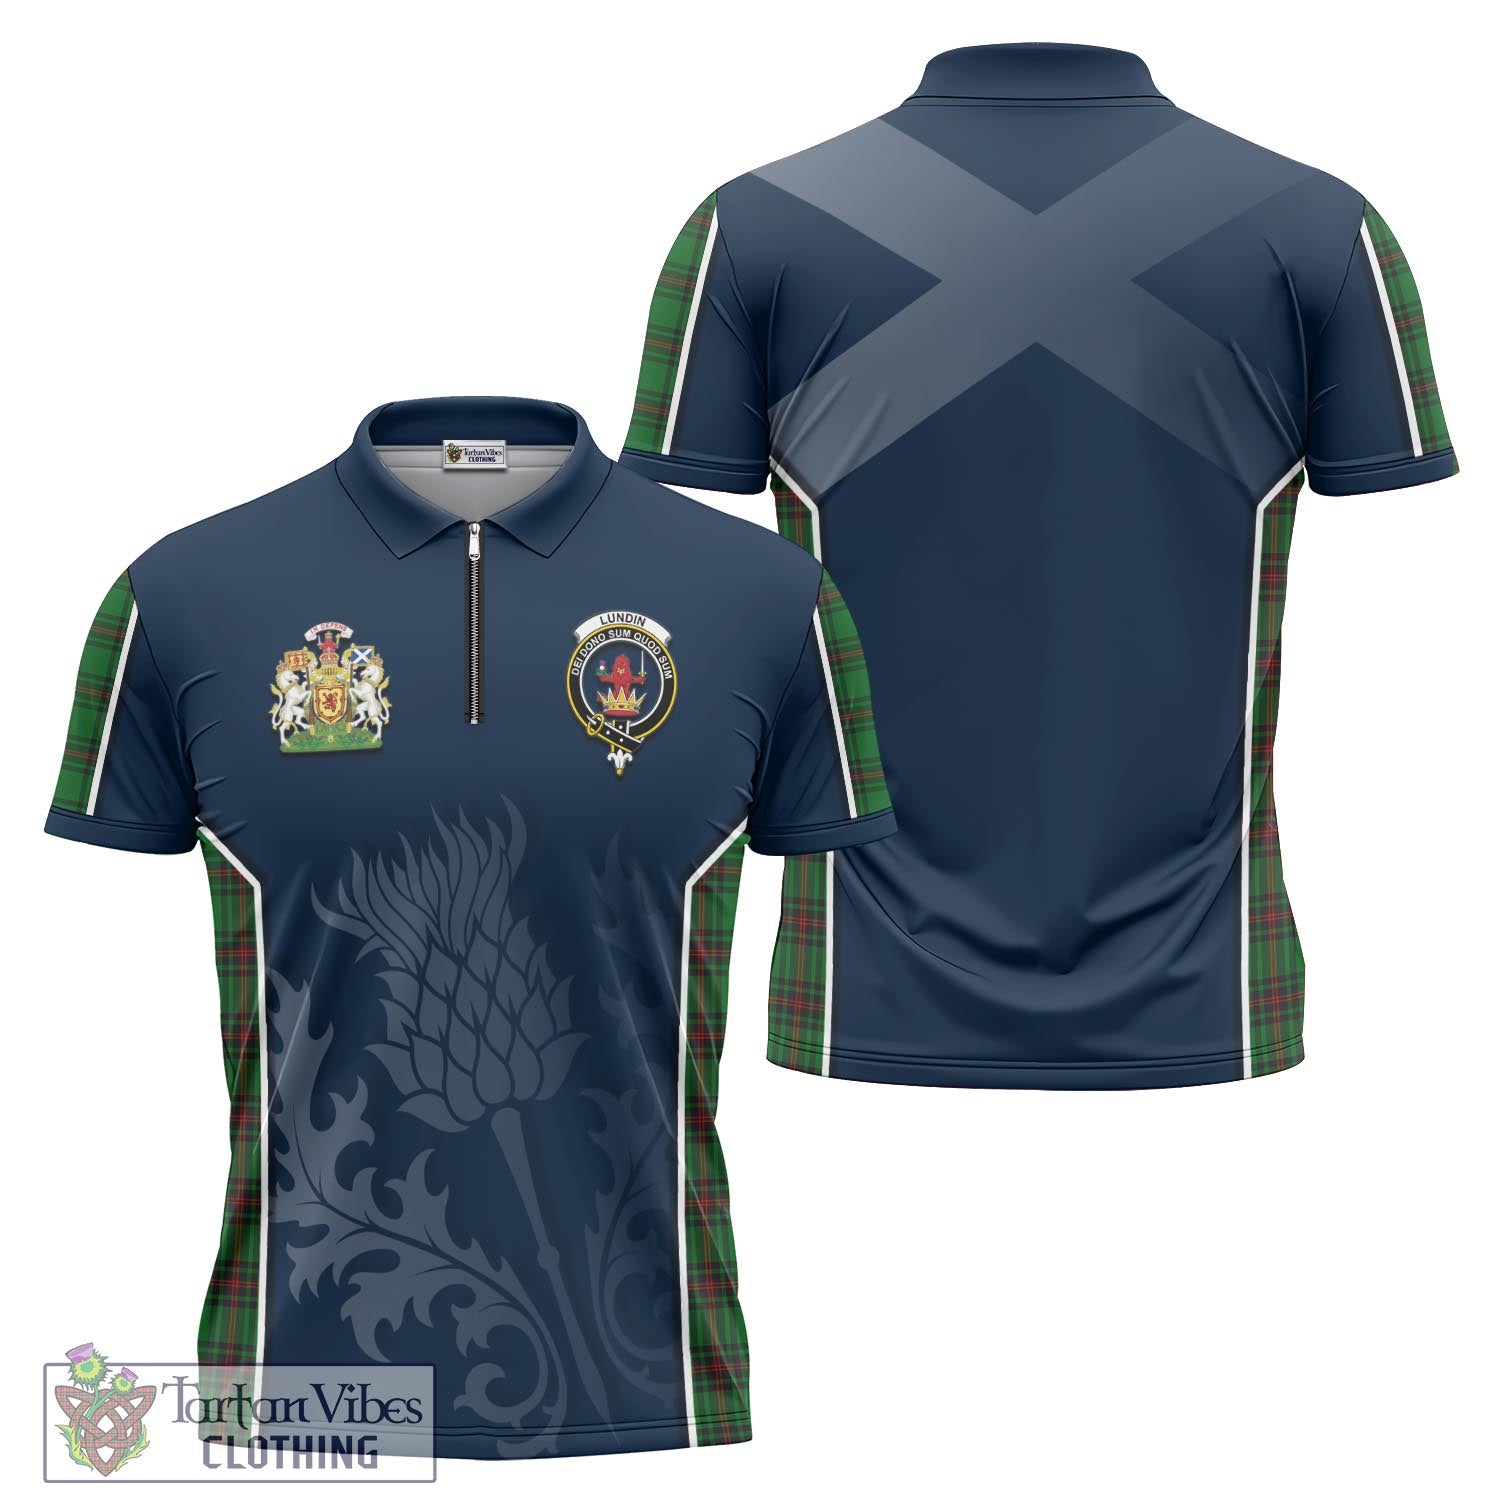 Tartan Vibes Clothing Lundin Tartan Zipper Polo Shirt with Family Crest and Scottish Thistle Vibes Sport Style